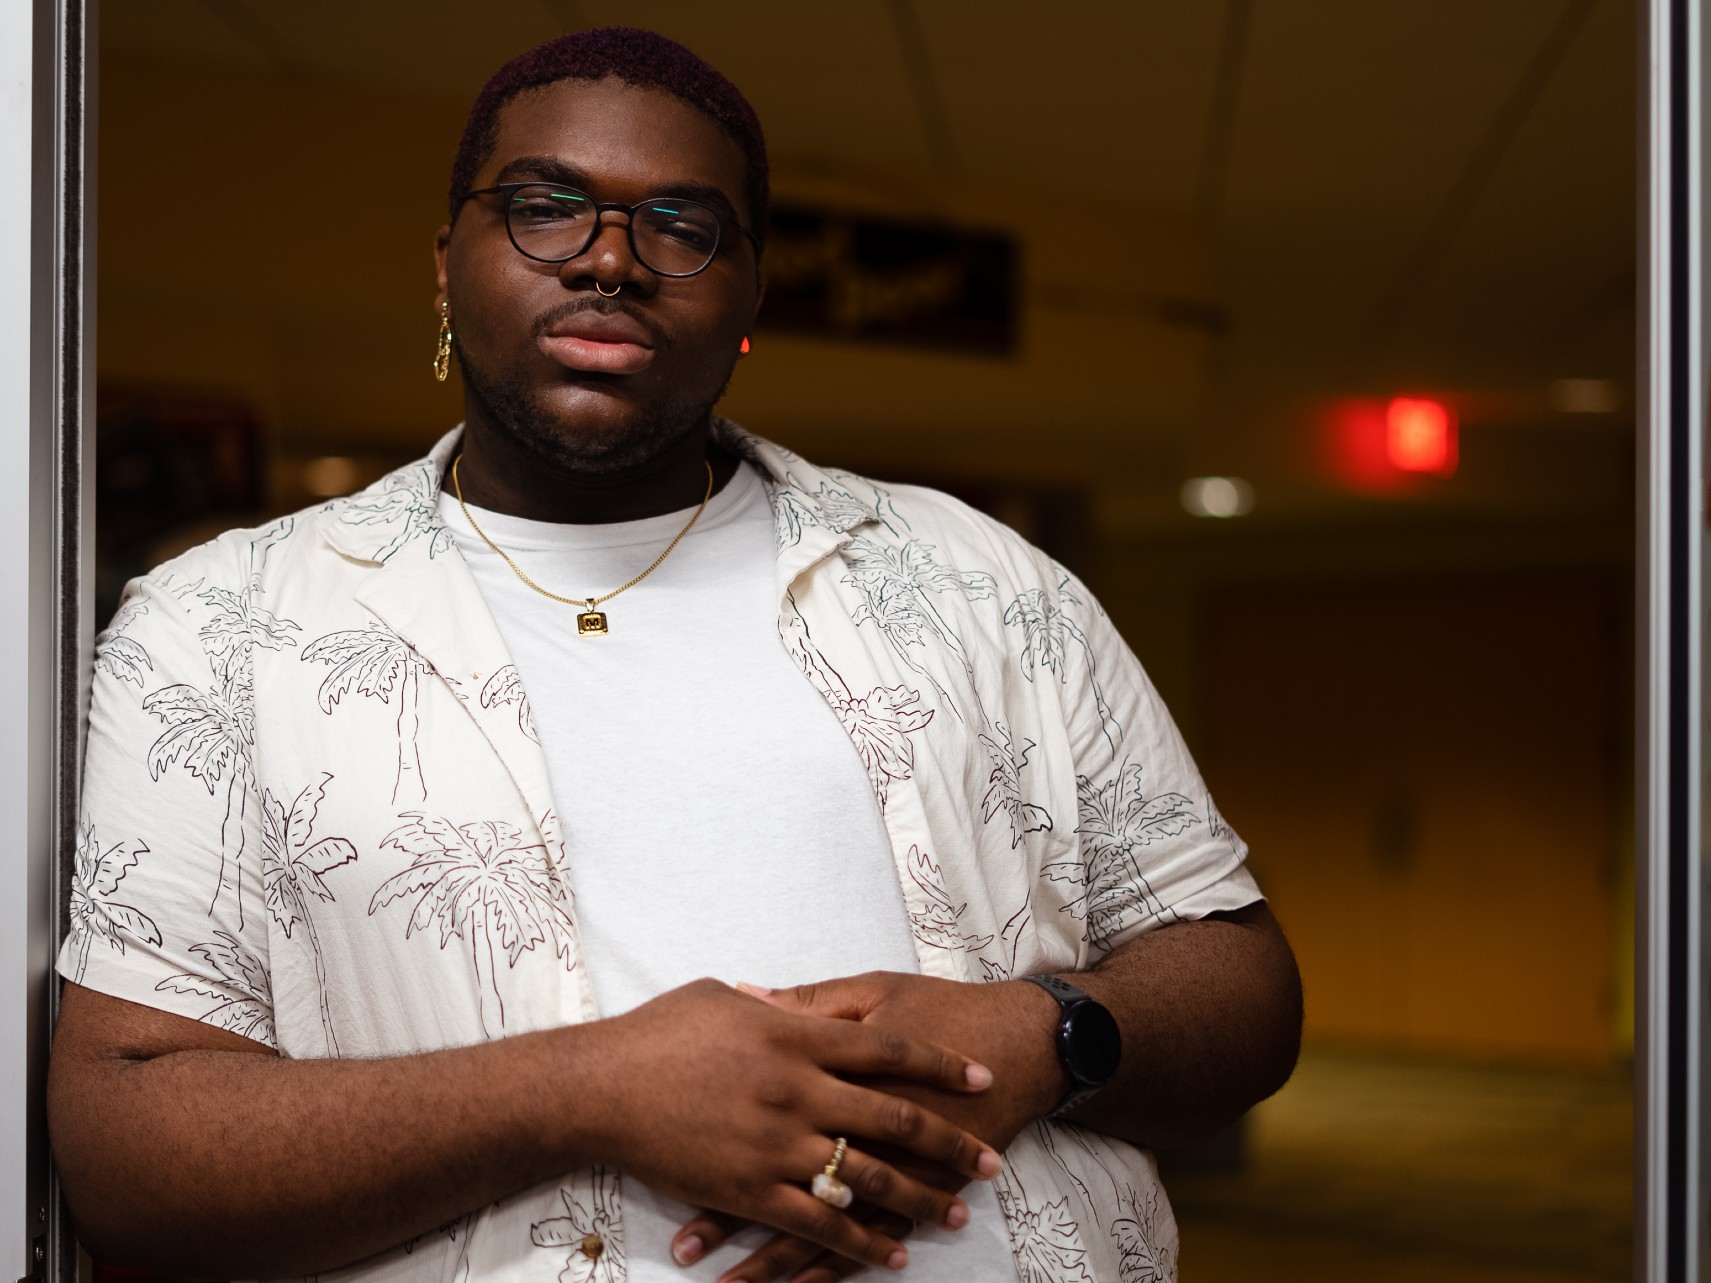 Mustafa Hall 23 says he found happiness at Muhlenberg when he learned to embrace his true self.